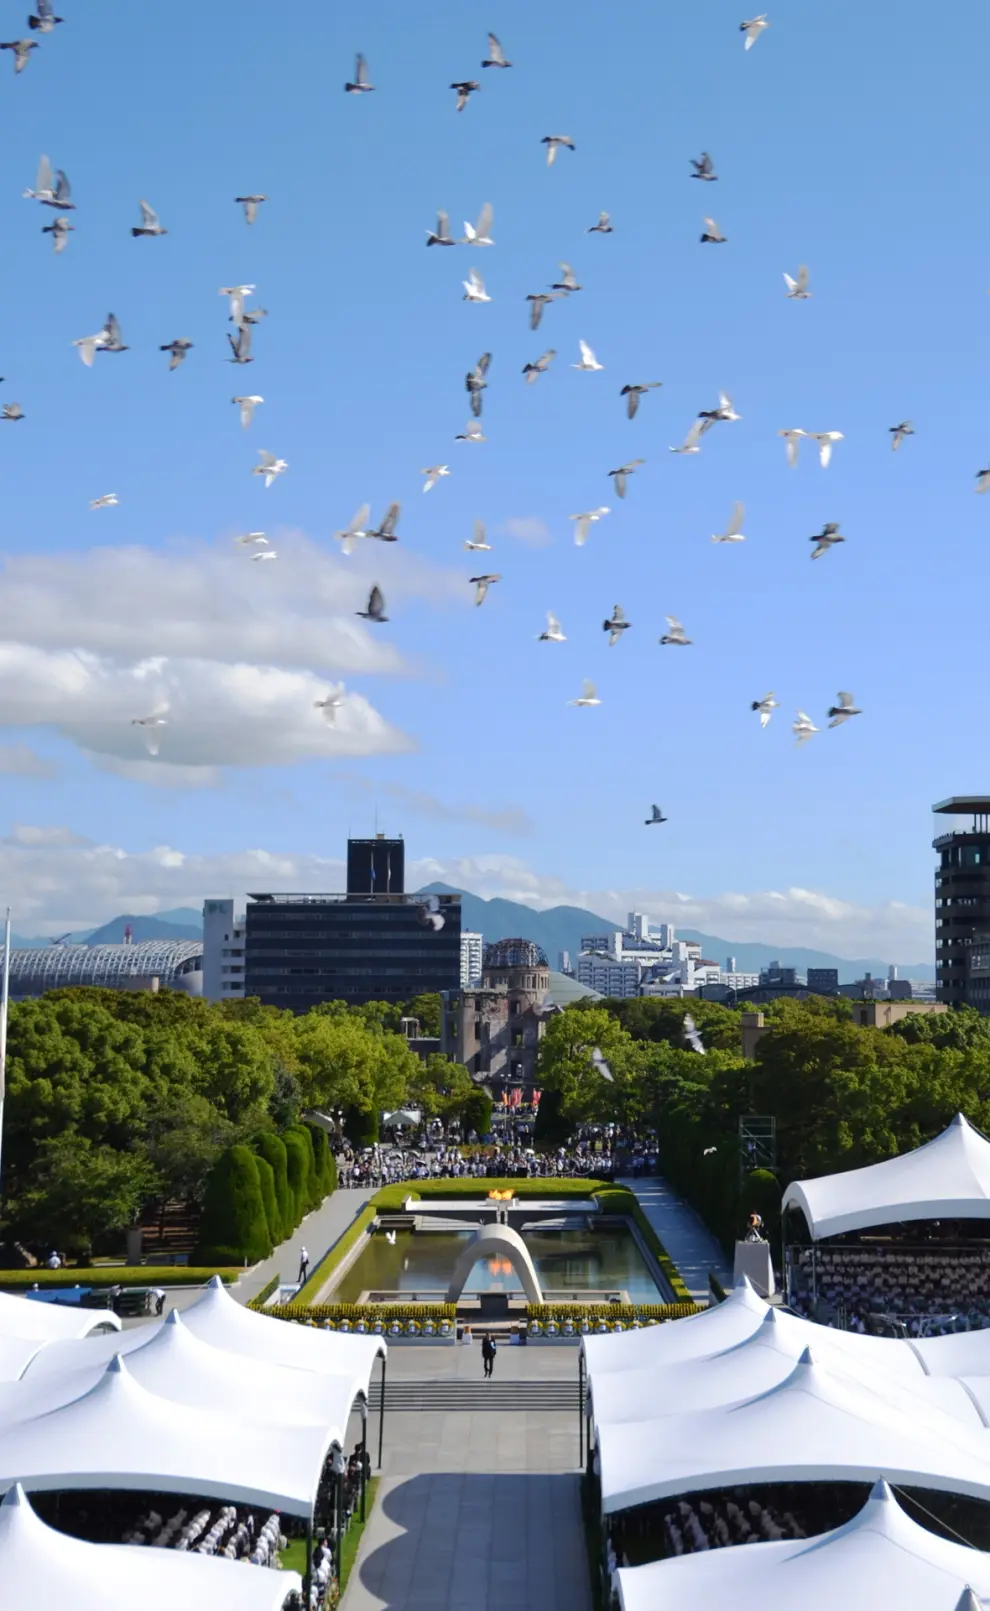 Hiroshima (Japan), 05/08/2023.- Doves fly over the memorial service for victims of the atomic bombing of Hiroshima at Hiroshima Peace Memorial Park in Hiroshima, Hiroshima Prefecture, western Japan, 06 August 2023, marking the 78th anniversary of the atomic bombing. Hiroshima City has announced the toll of victims from the atomic bombing rose to about 140,000. The number of victims was counted as the end of 1945 after the August 6 bombing. (Japón) EFE/EPA/JIJI PRESS JAPAN OUT EDITORIAL USE ONLY
